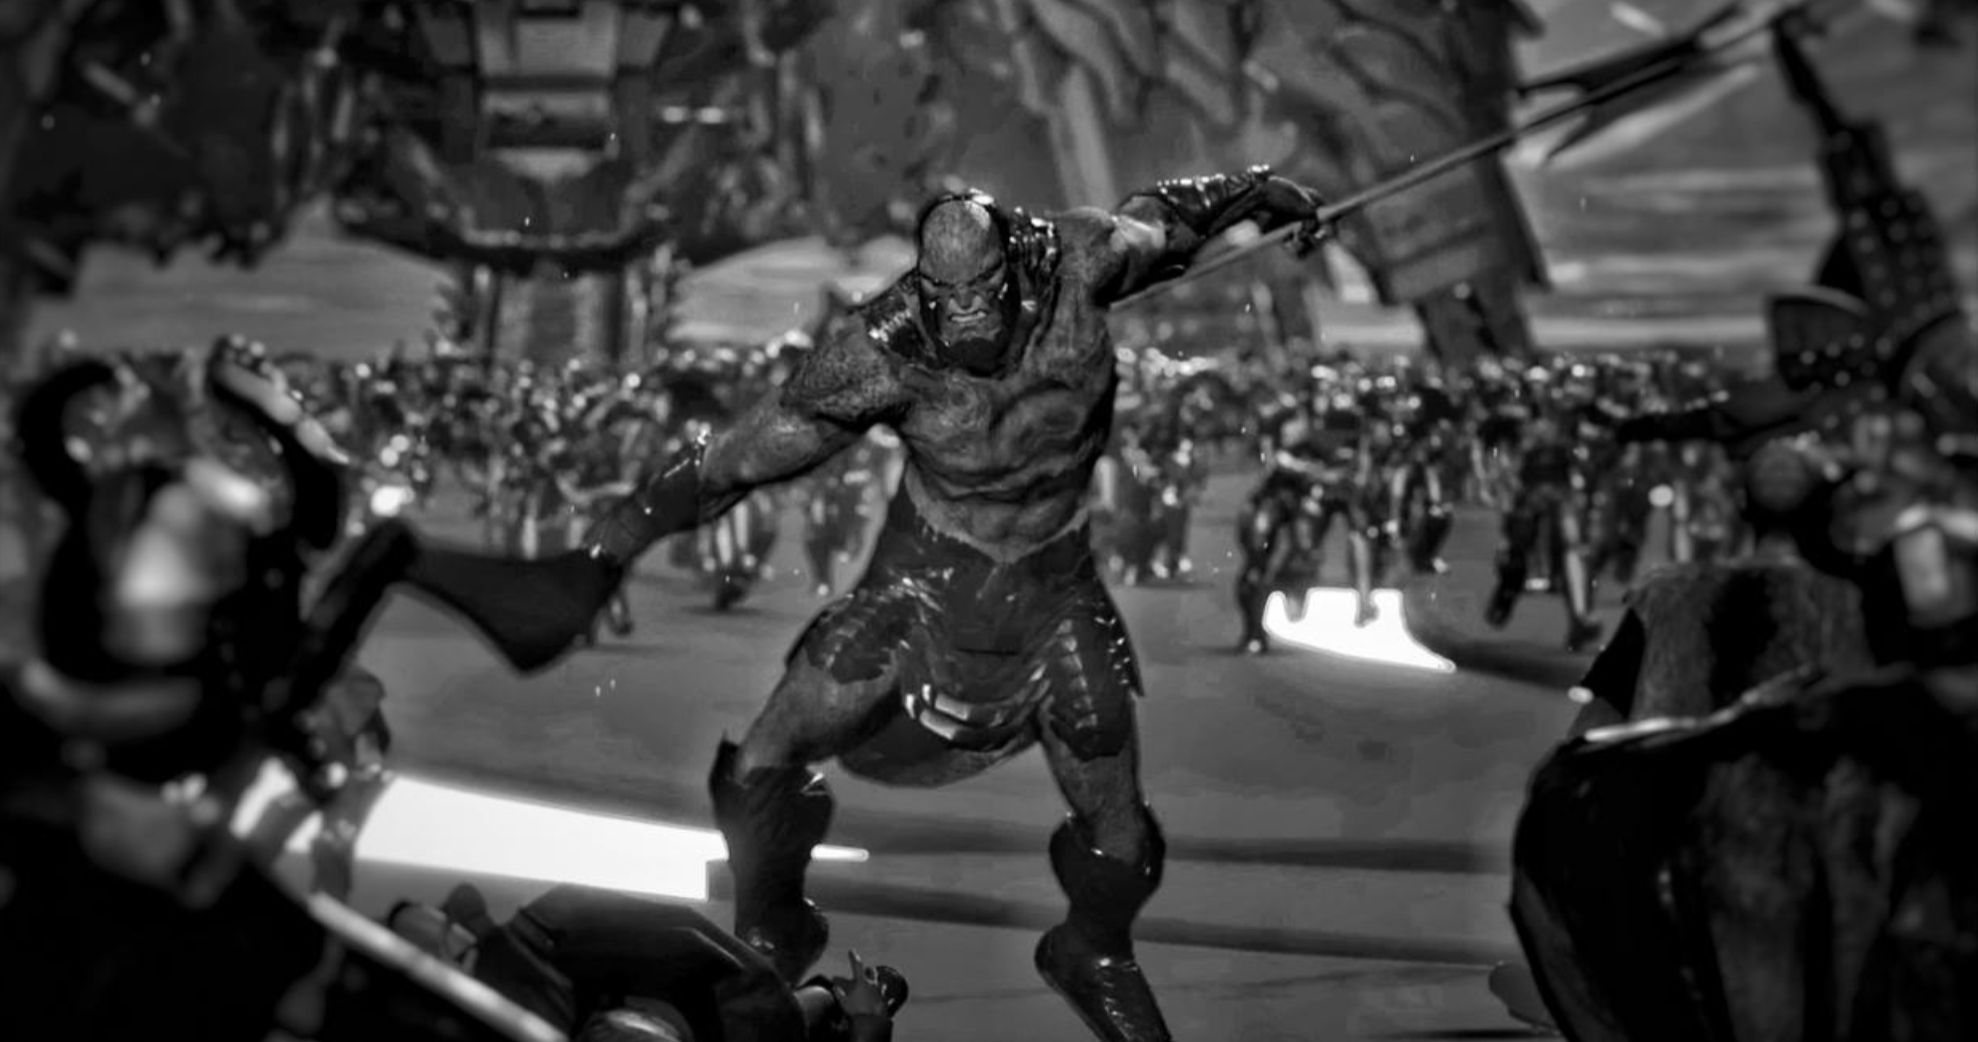 Darkseid Rampages in New #ReleaseTheSnyderCut Justice League Image